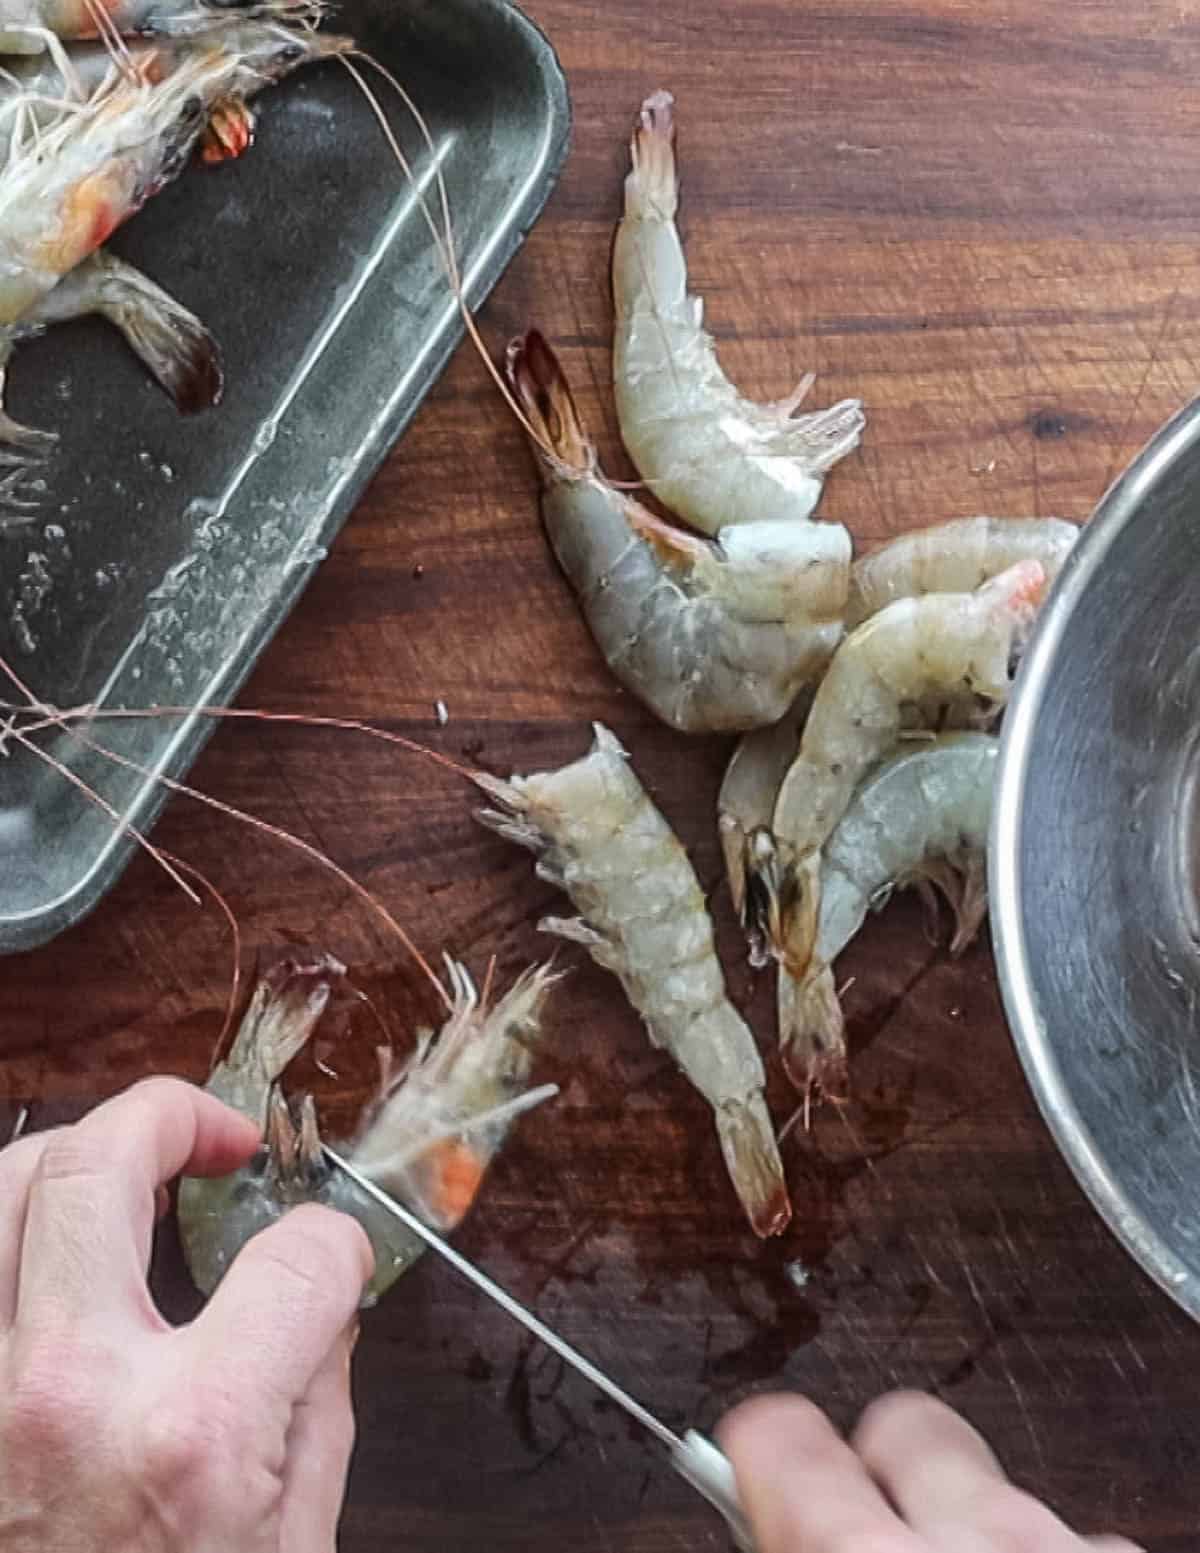 Removing heads from shrimp using a paring knife.